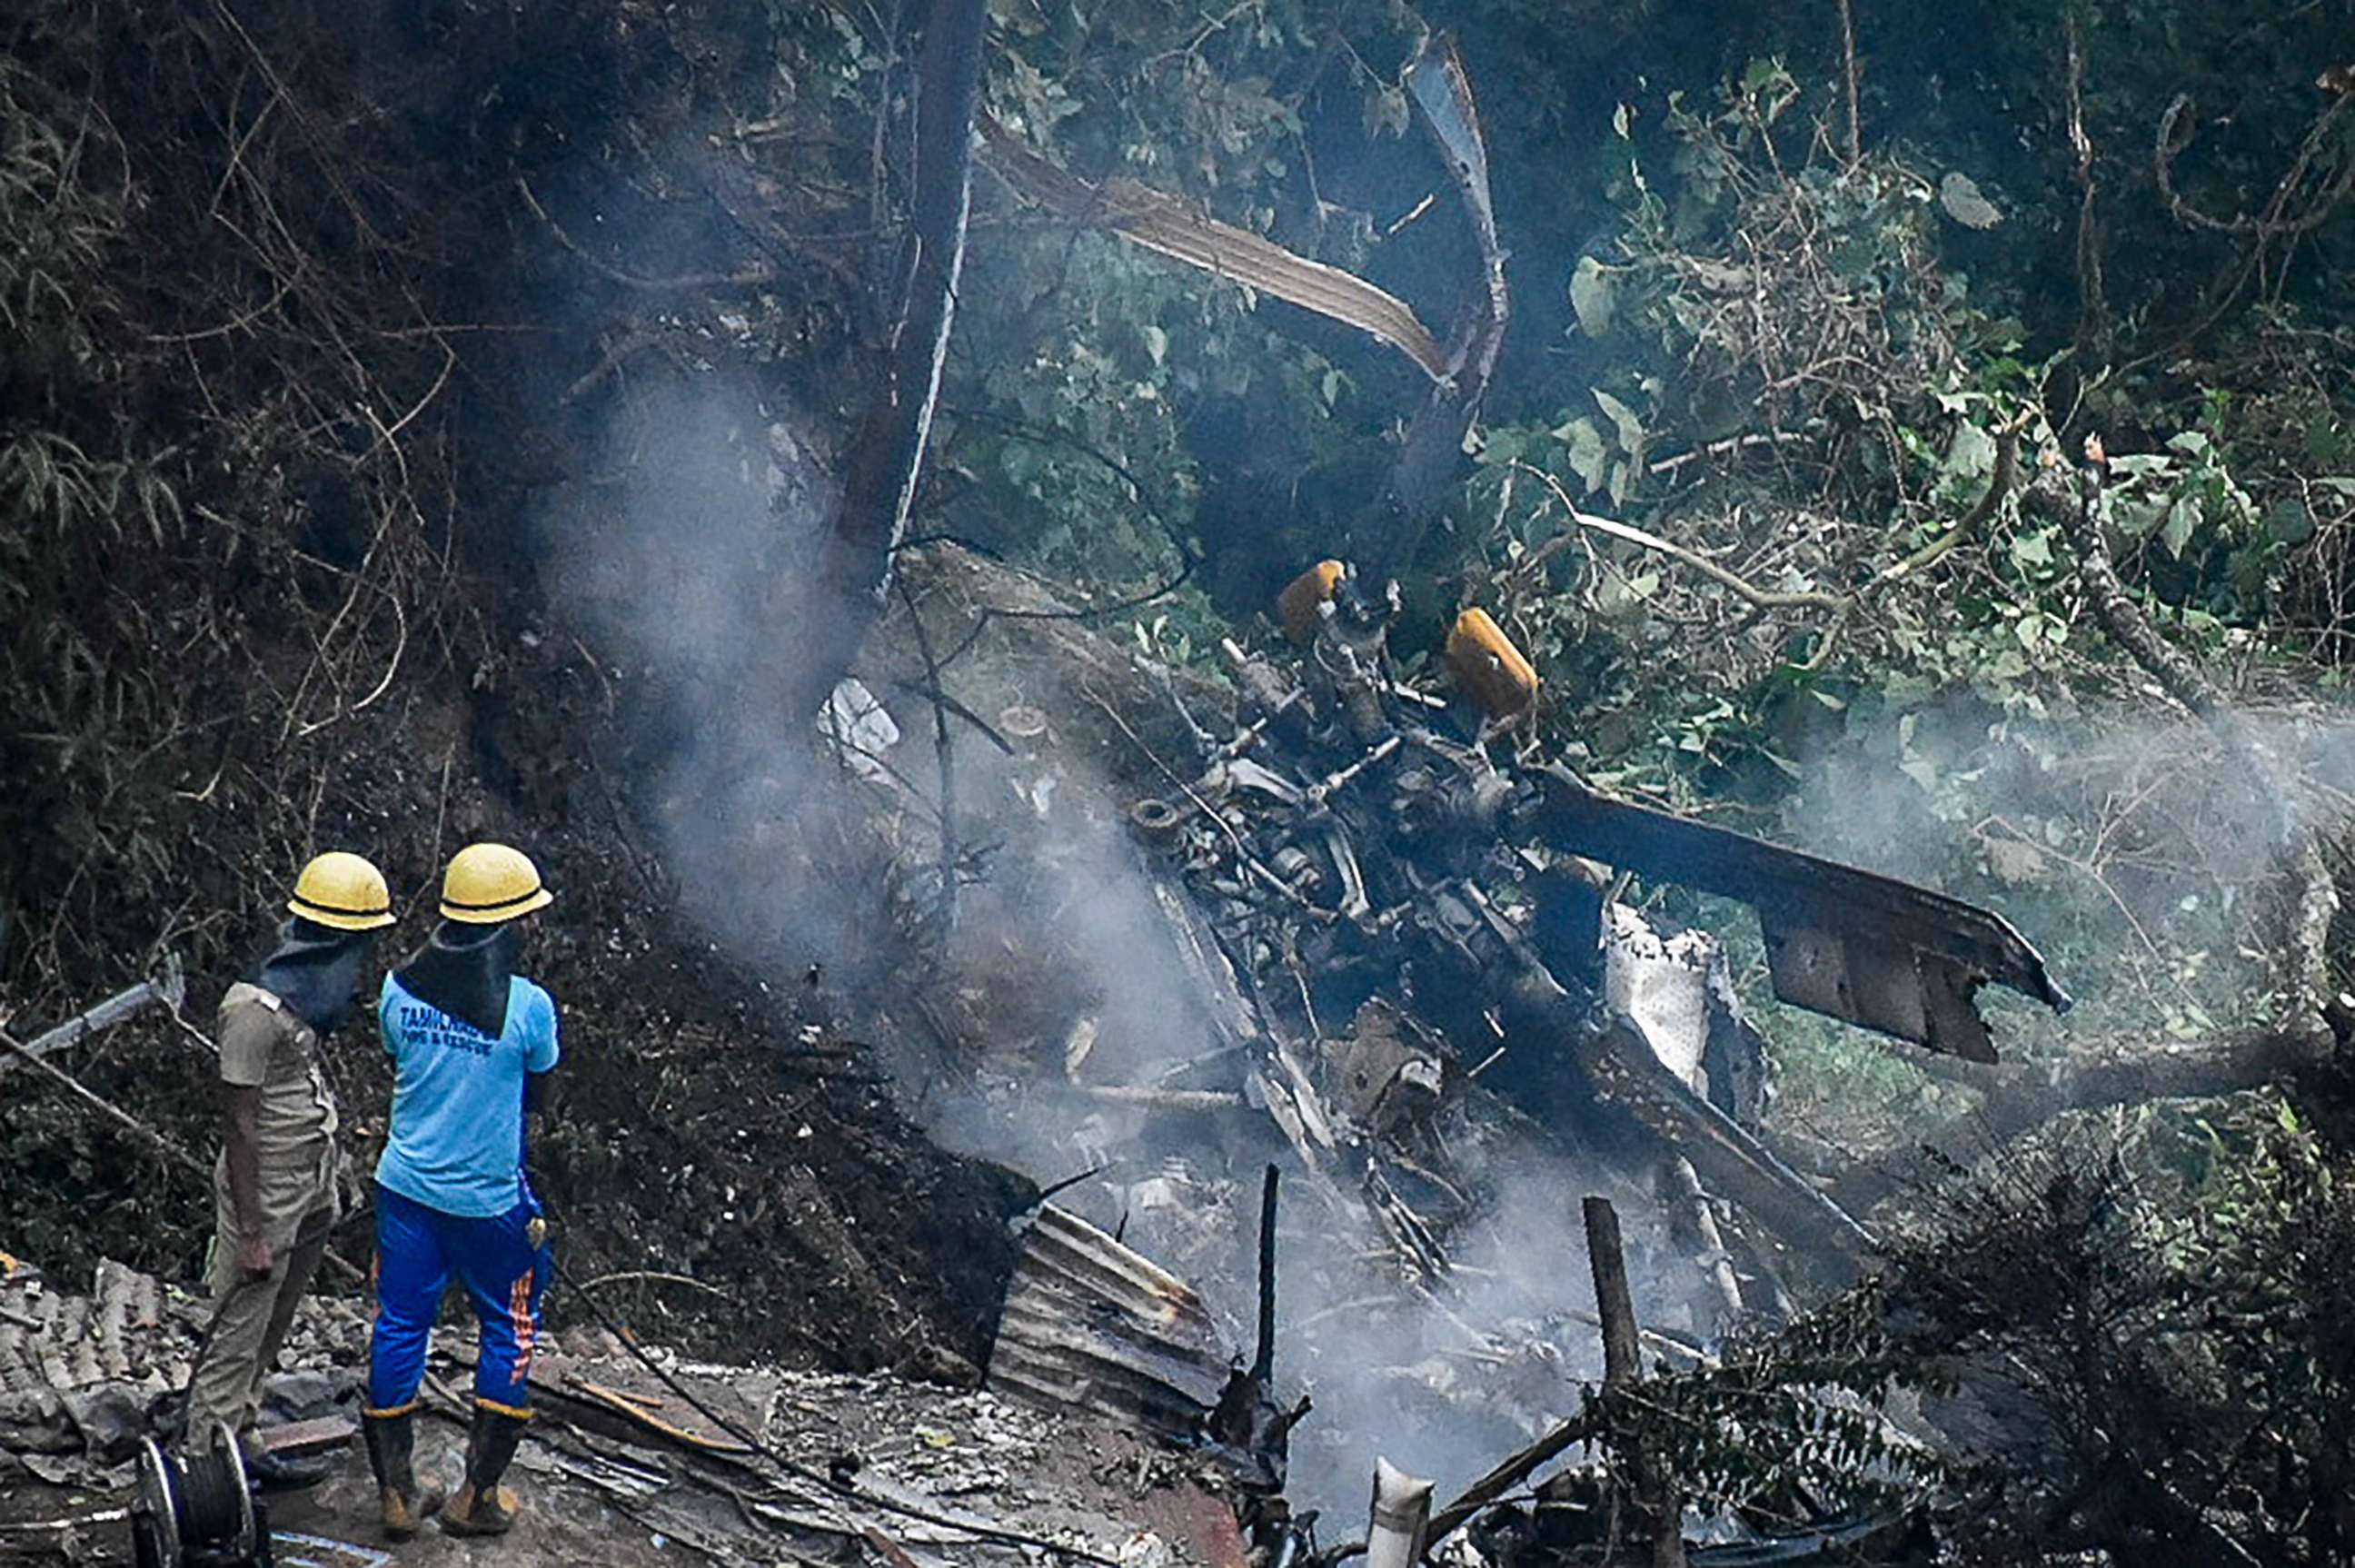 PHOTO: Firemen and rescue workers stand next to the debris of an IAF Mi-17V5 helicopter crash site in Coonoor, Tamil Nadu, on Dec. 8, 2021.